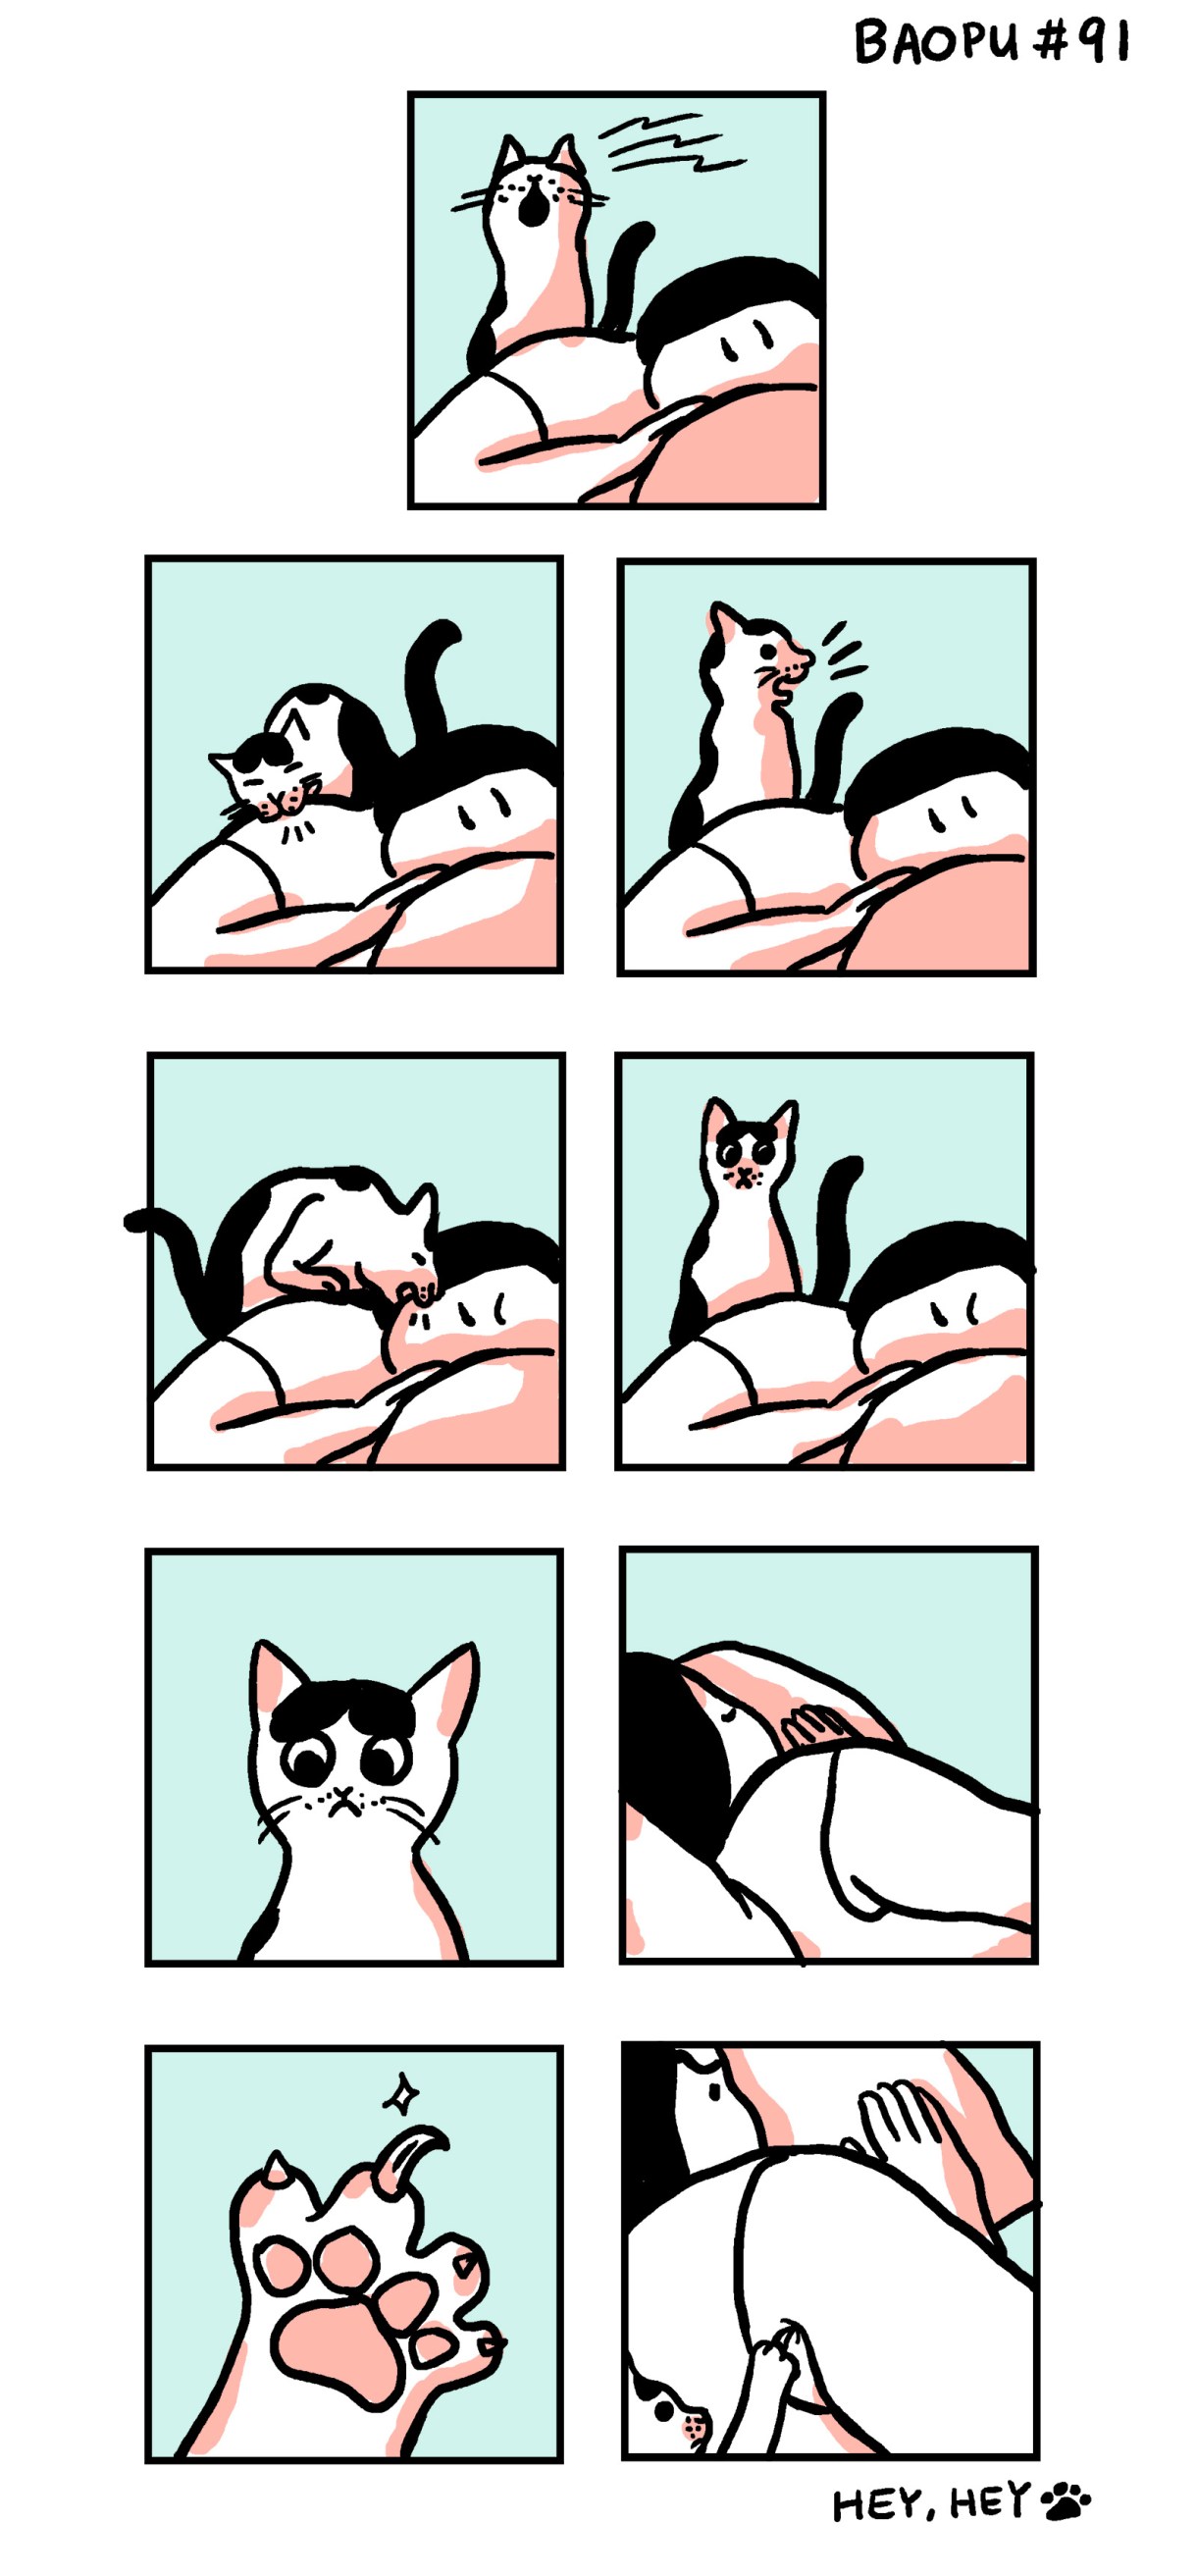 There's a cat laying against a human trying to wake them up across a nine panel comic in shades of blue, pink, and white.